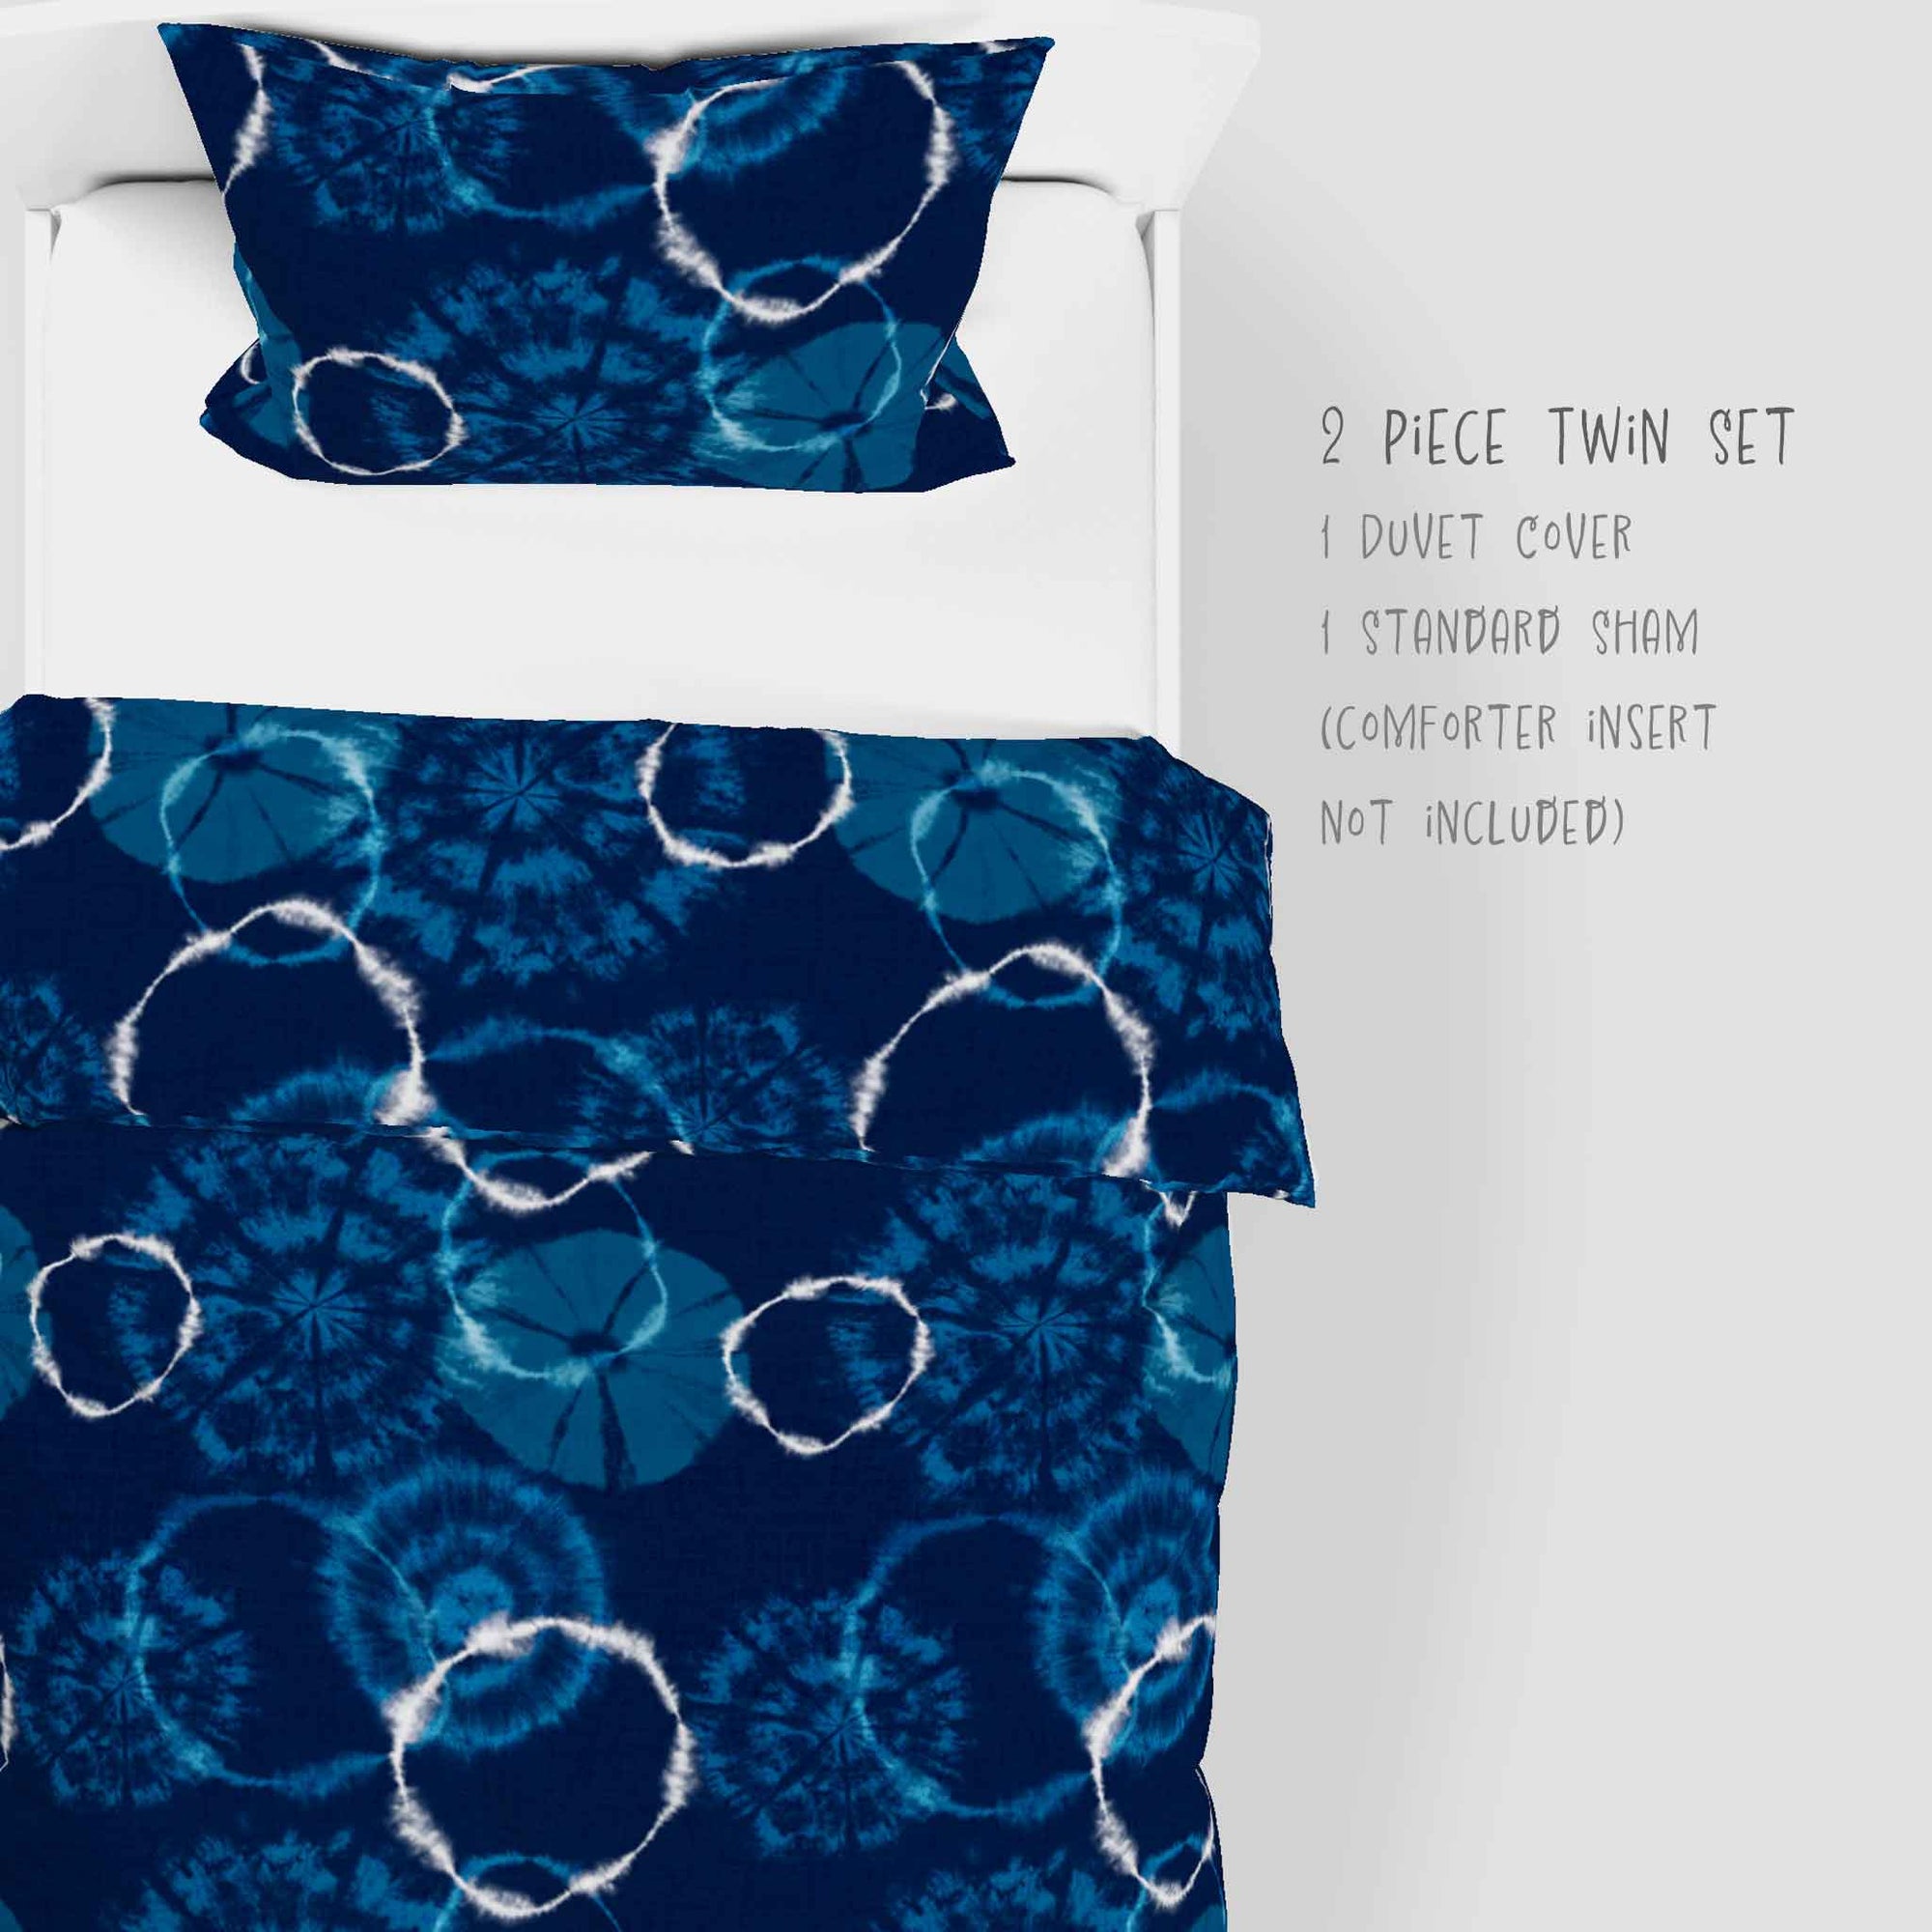 2 piece Shibori Indigo Tie Dye Dream pattern. Available in twin size Your order arrives with a duvet cover and one sham.